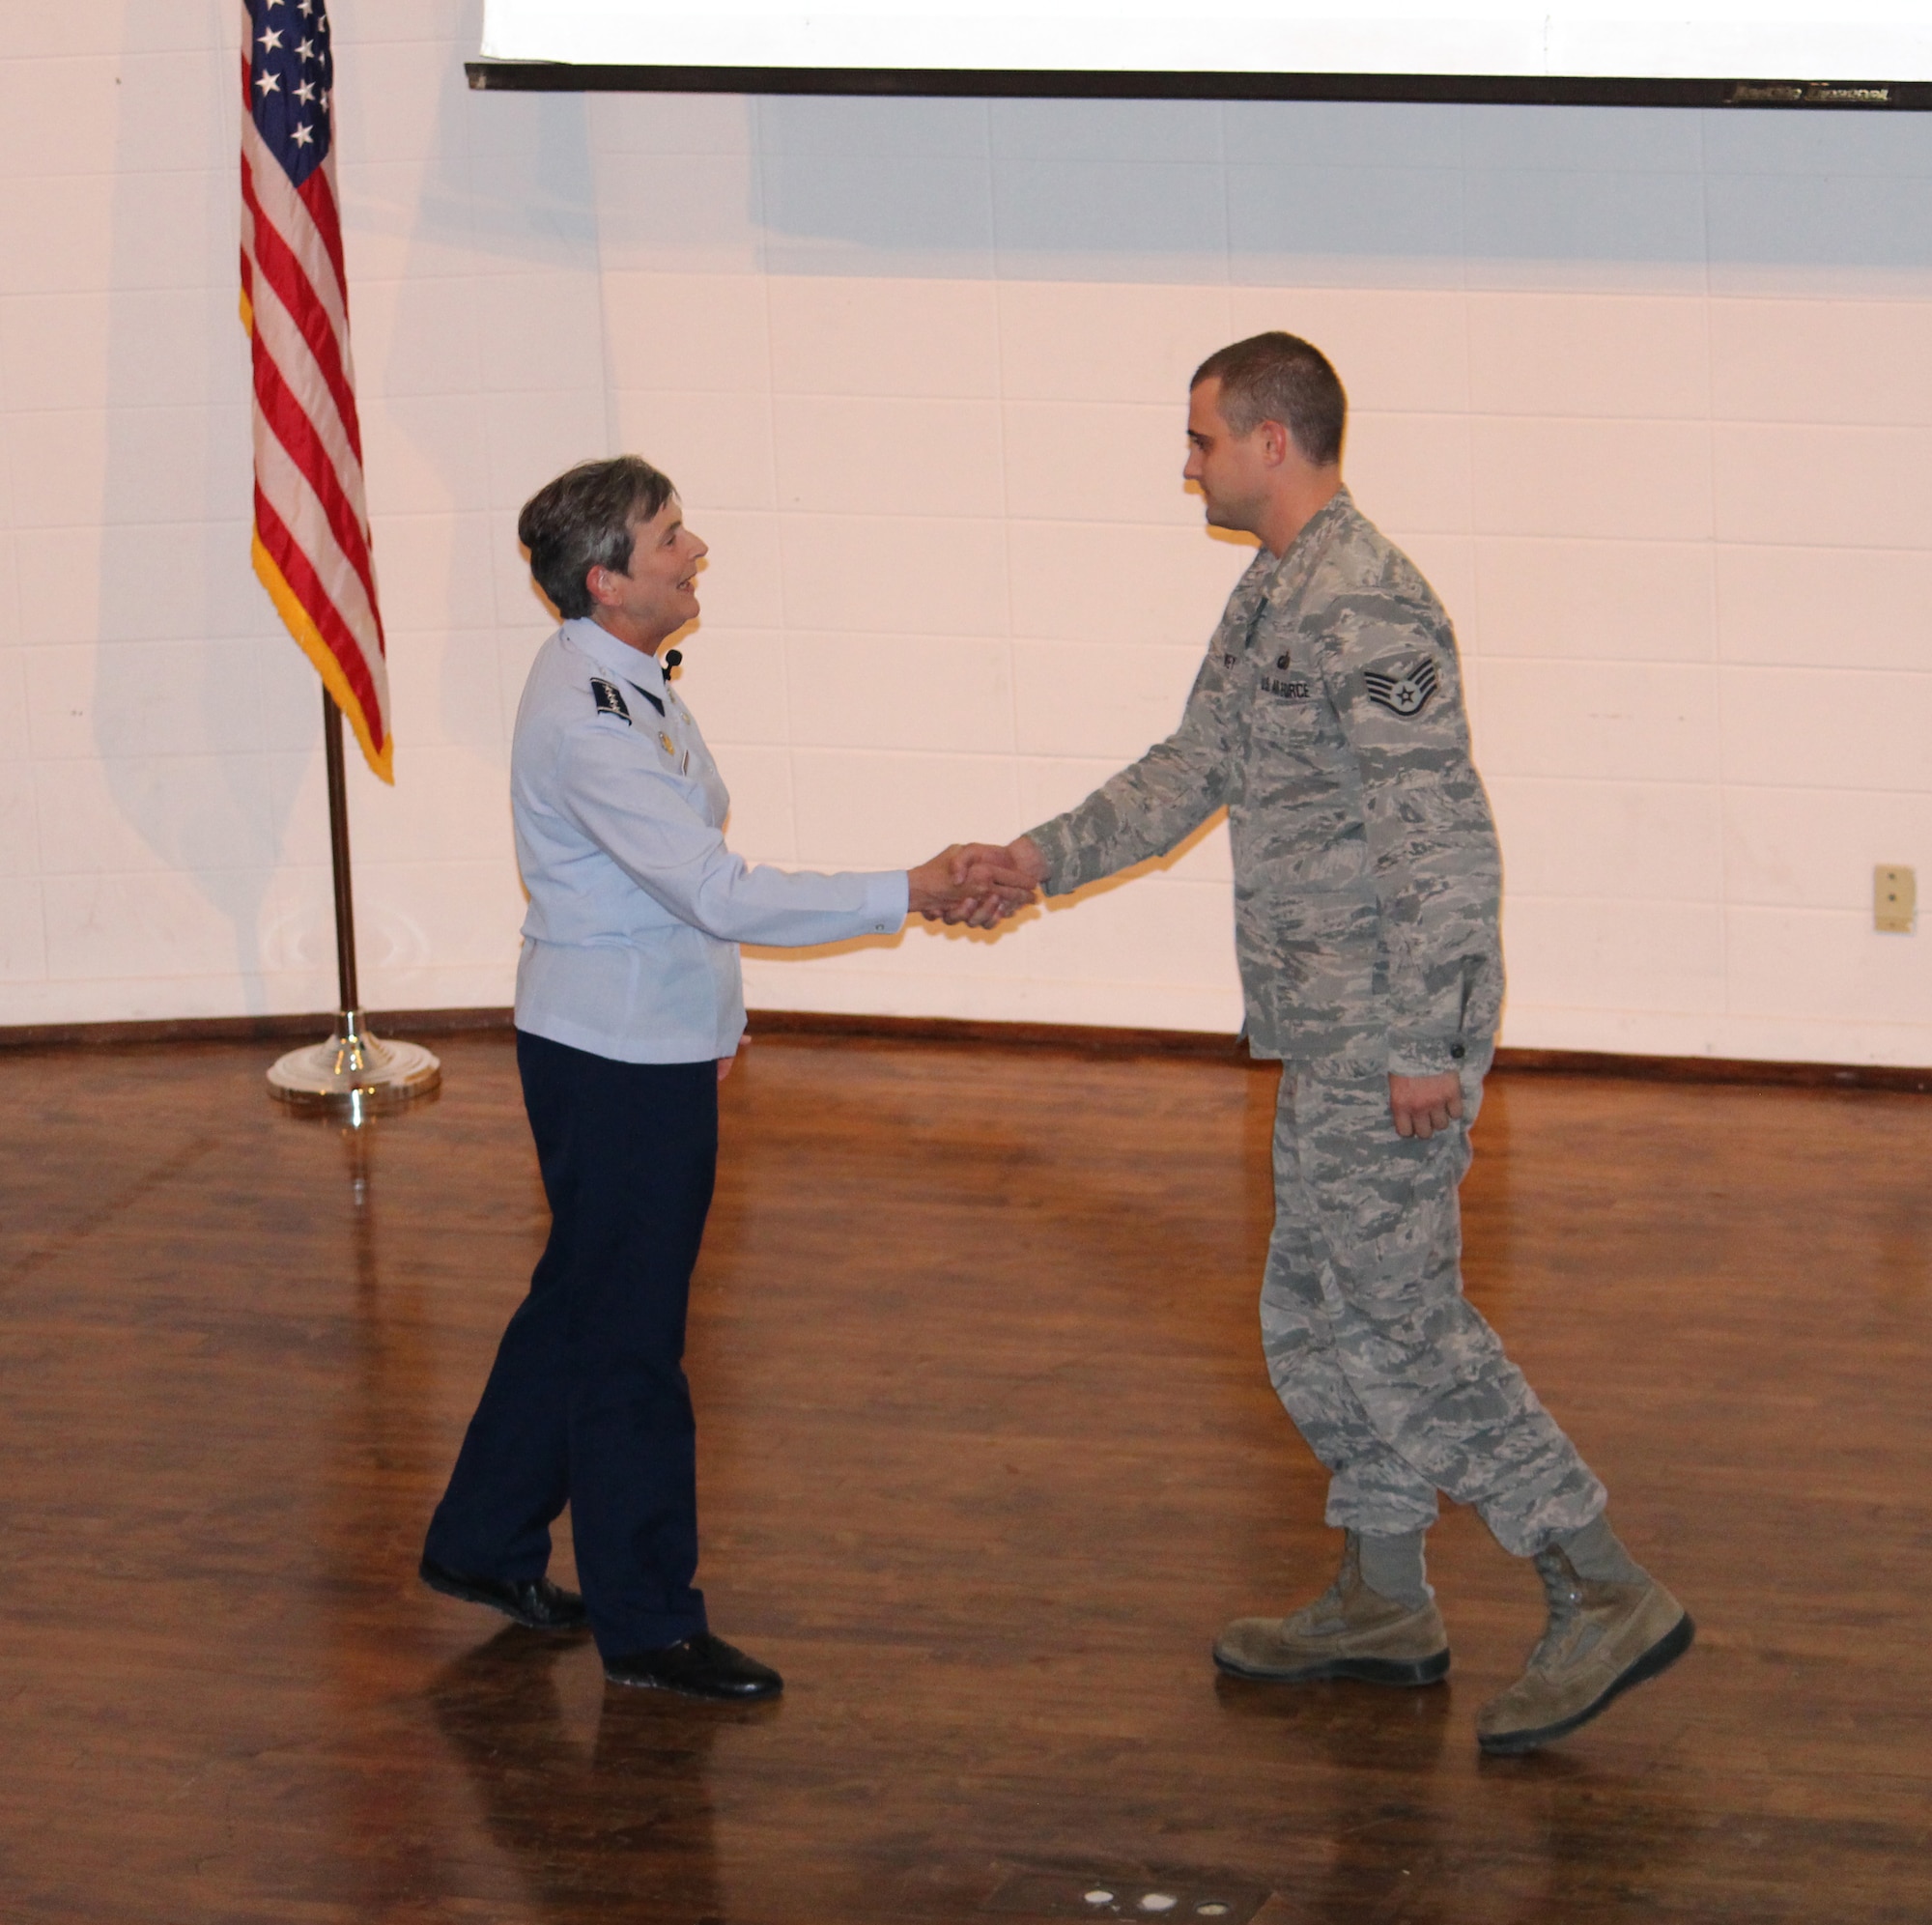 Gen. Ellen M. Pawlikowski (left), commander of Air Force Materiel Command, presents the Commander’s Coin to Staff Sgt. Jared Vanwey, AEDC Financial Management and Comptrollers Division, during the Arnold Air Force Base, Tenn., Commander’s Call at the University of Tennessee Space Institute auditorium Oct. 16, 2015. The general also presented coins to Clark Brandon, deputy of the AEDC Test Support Division, and 2nd Lt. Roy Fisher, of the Propulsion Wind Tunnel Test Branch. Commander’s Coins are presented to recognize a job well done. (U.S. Air Force photo/ Holly Fowler)